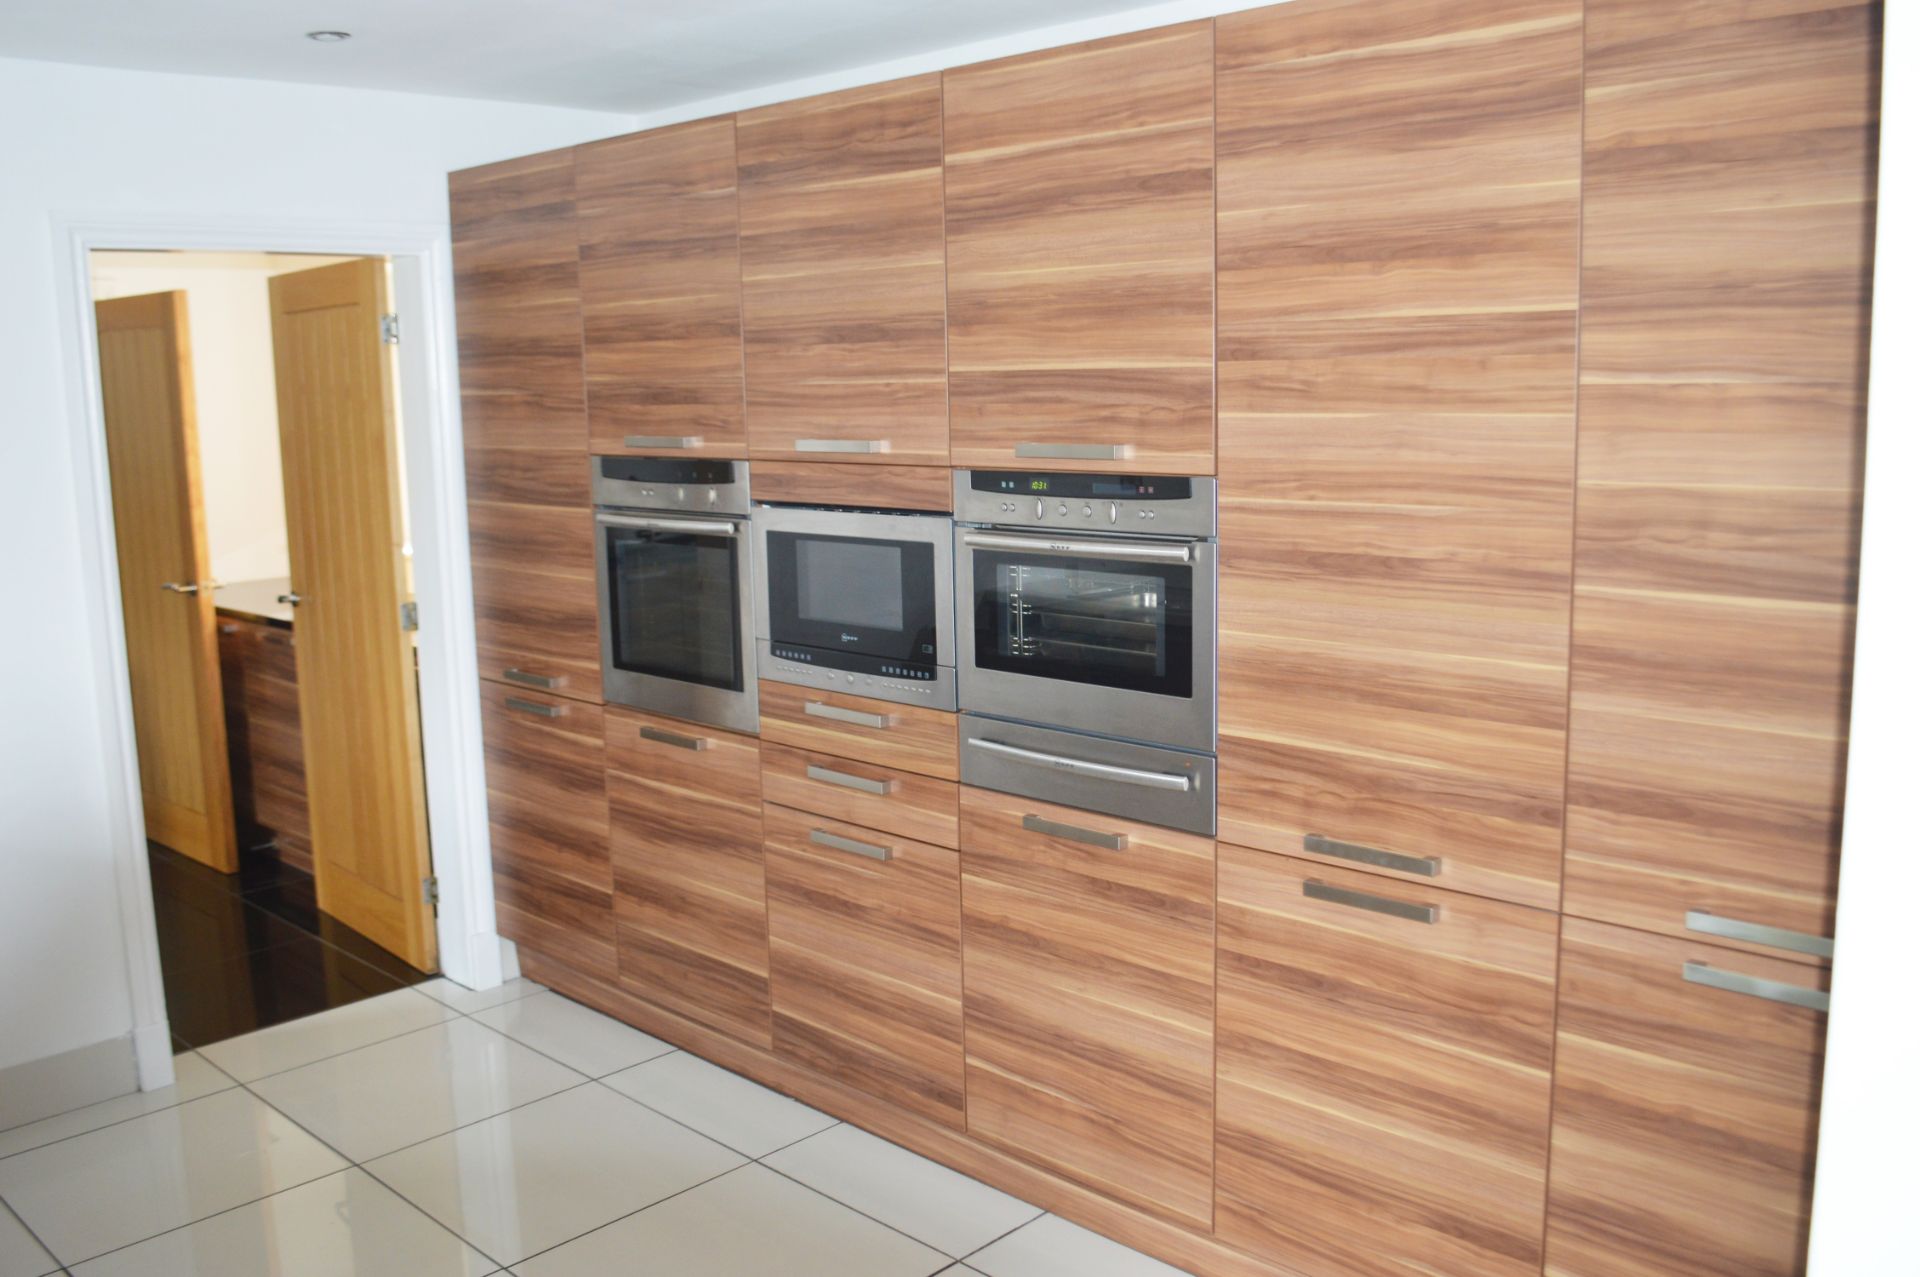 1 x Contemporary Bespoke Fitted Kitchen With Neff Branded Appliances - Collection Date: 1st November - Image 6 of 52